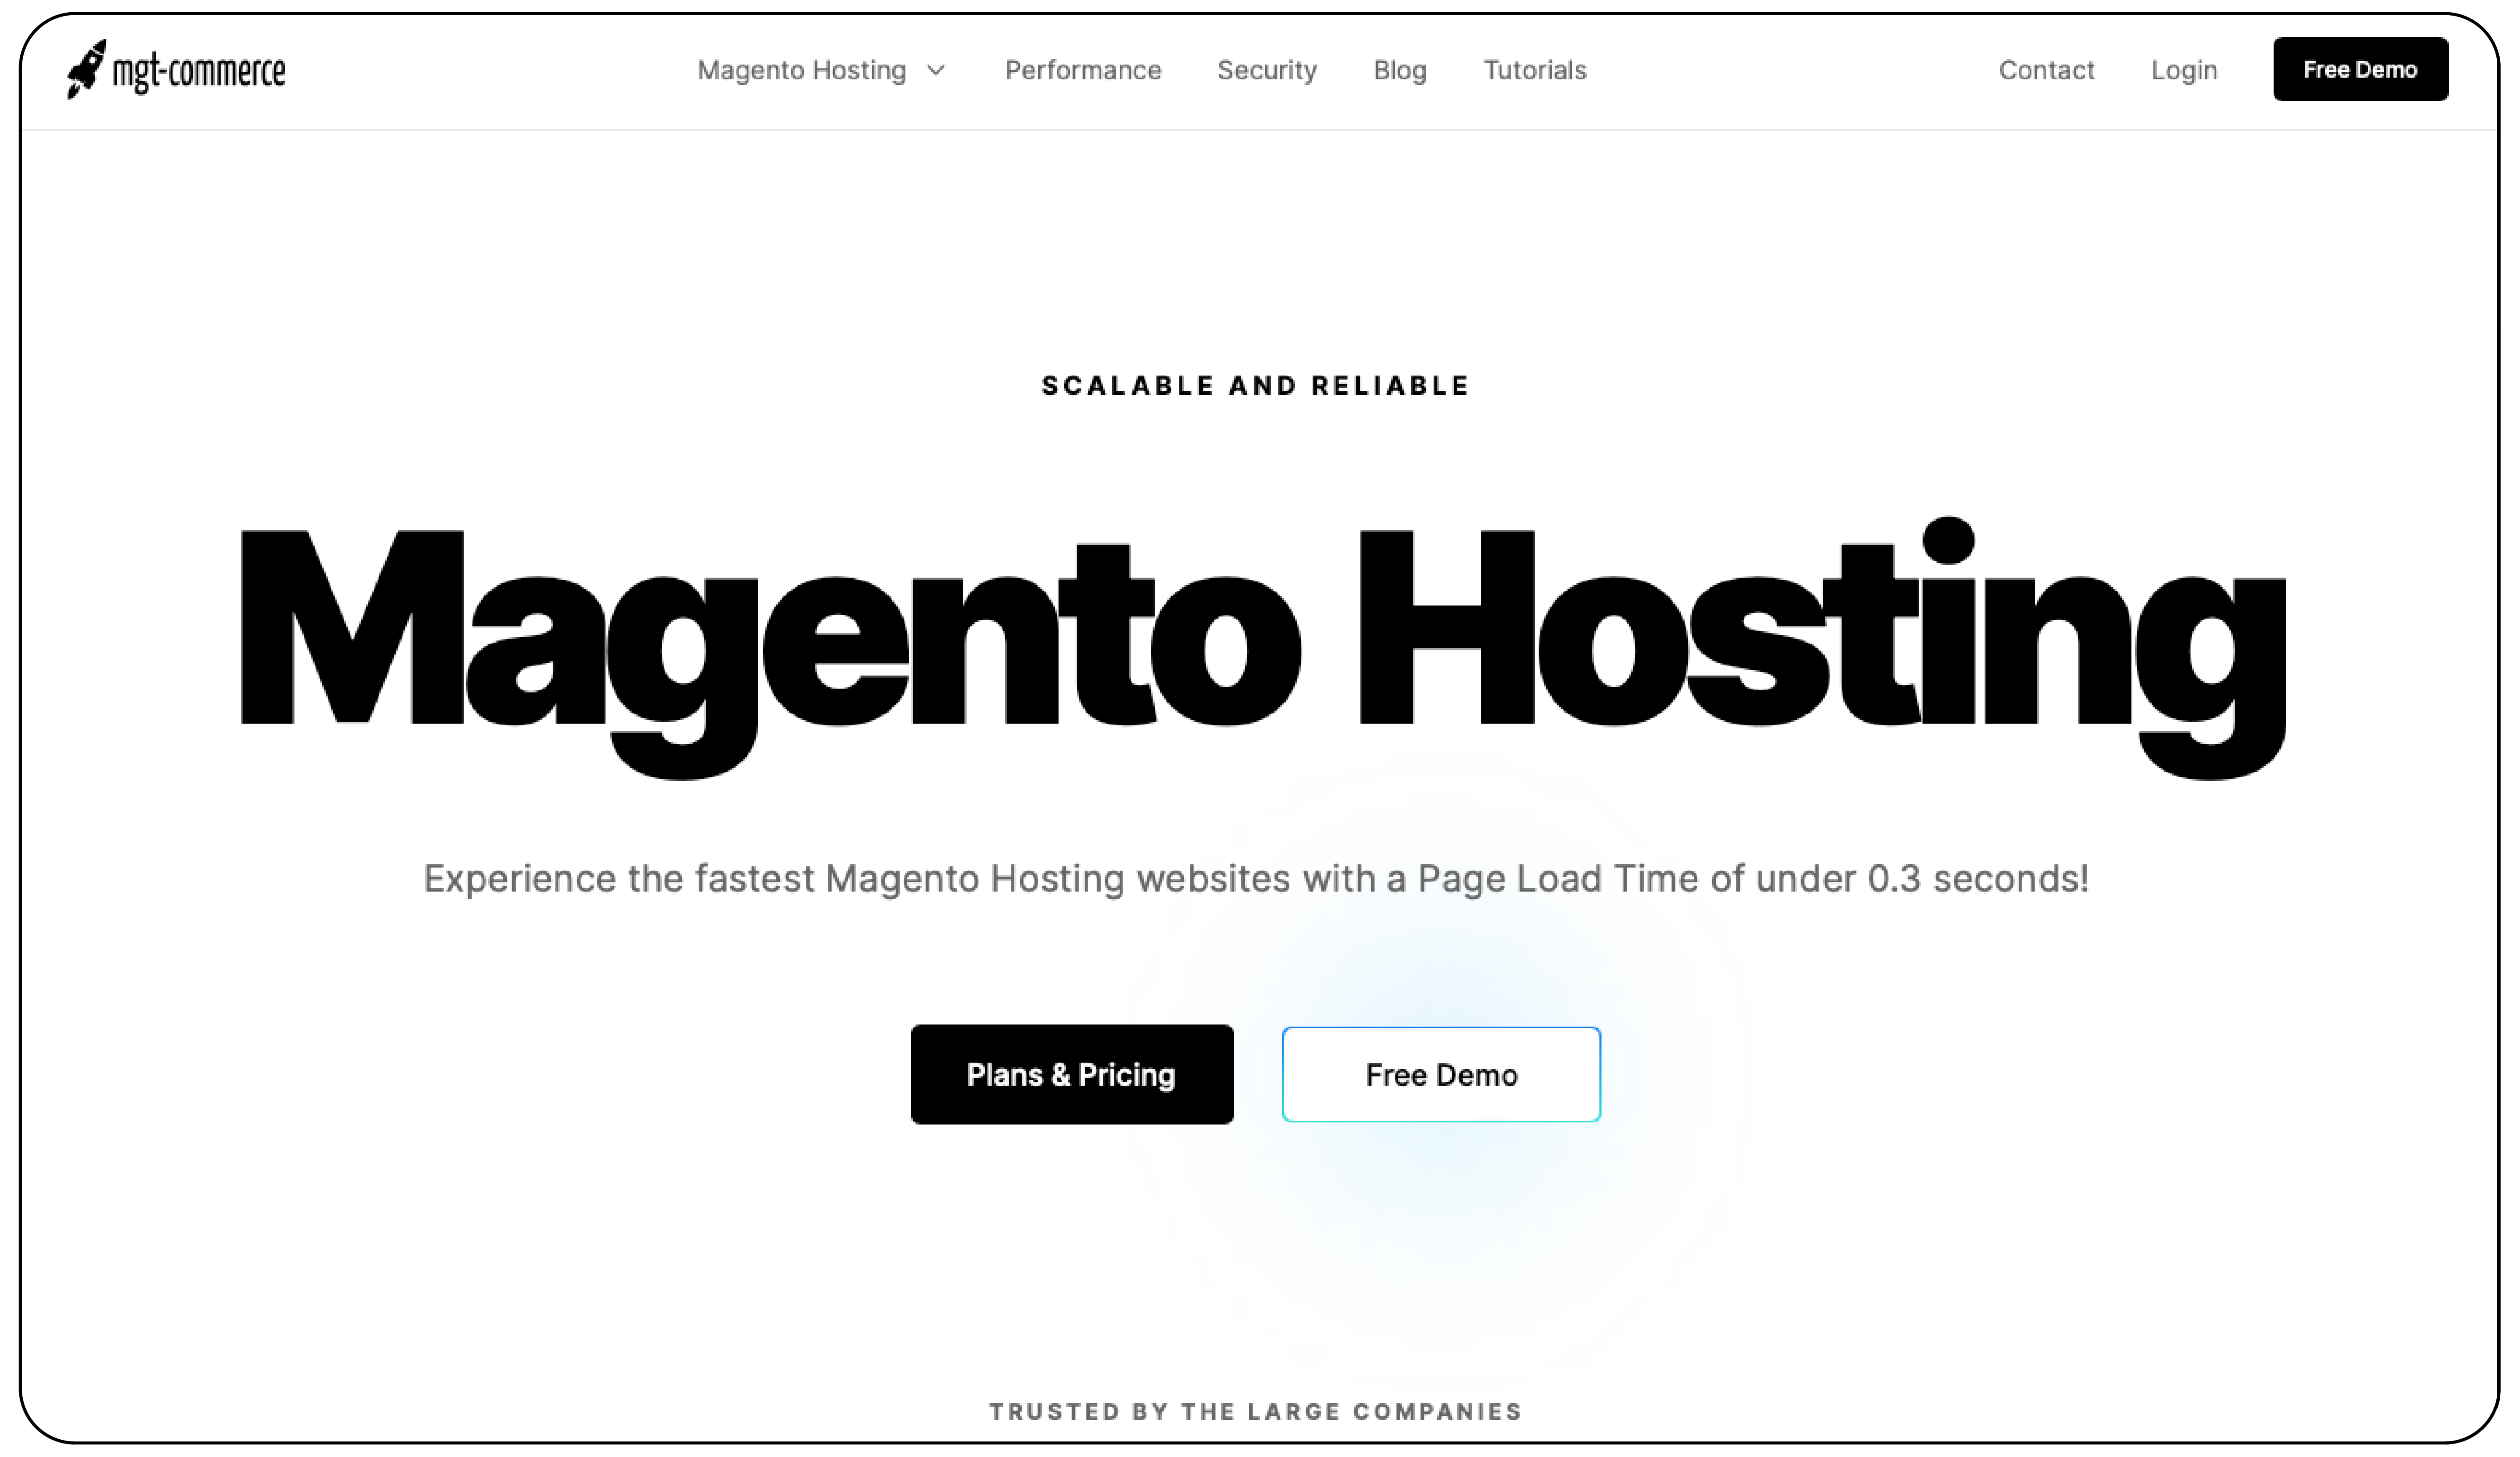 MGT Commerce for Magento hosting specialist